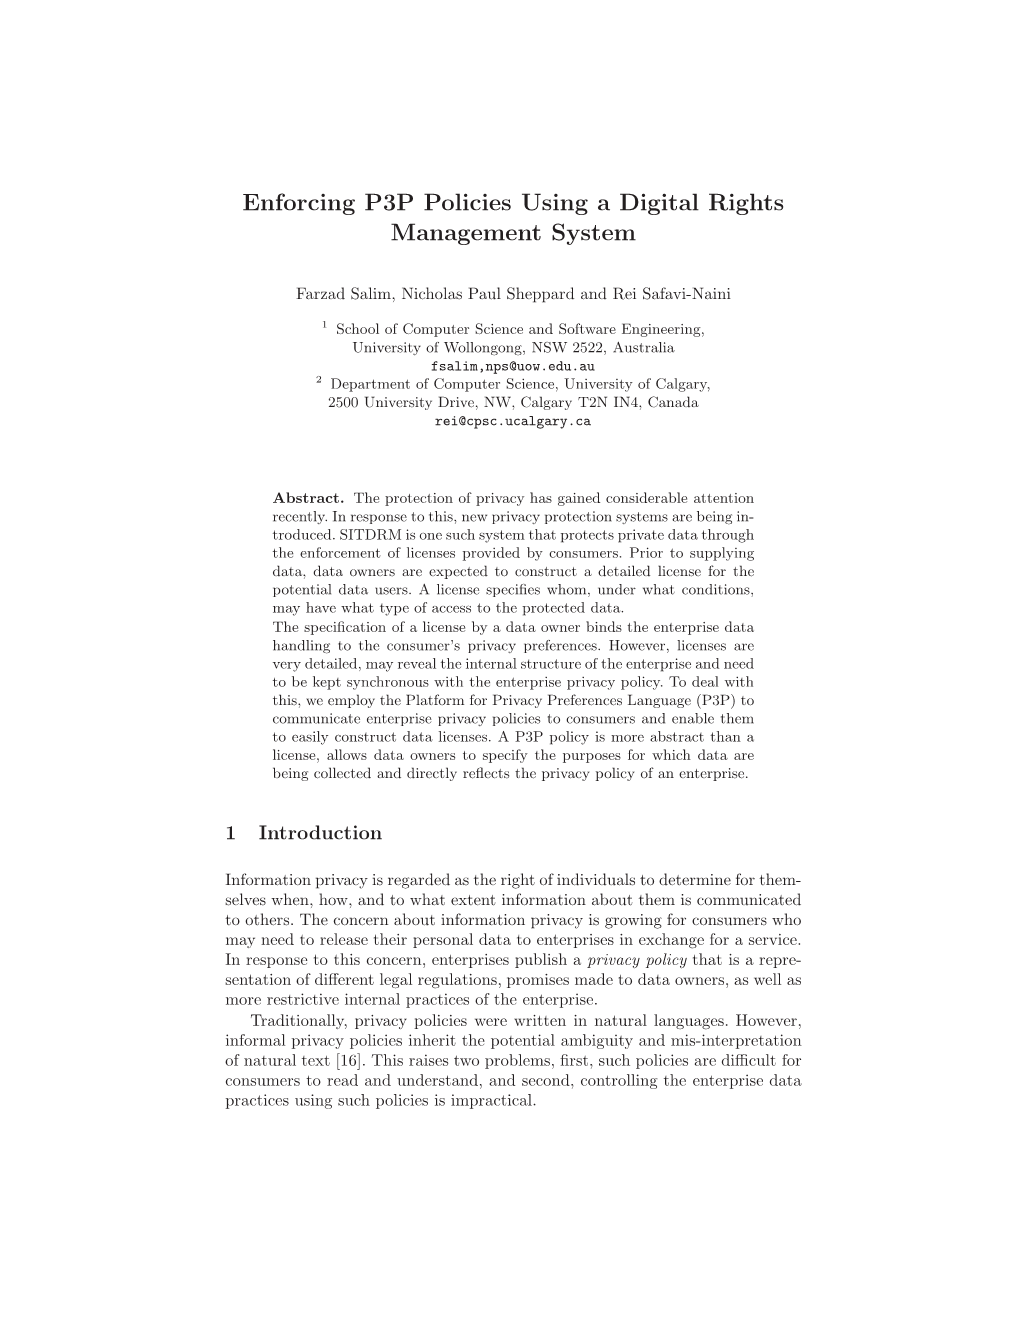 Enforcing P3P Policies Using a Digital Rights Management System